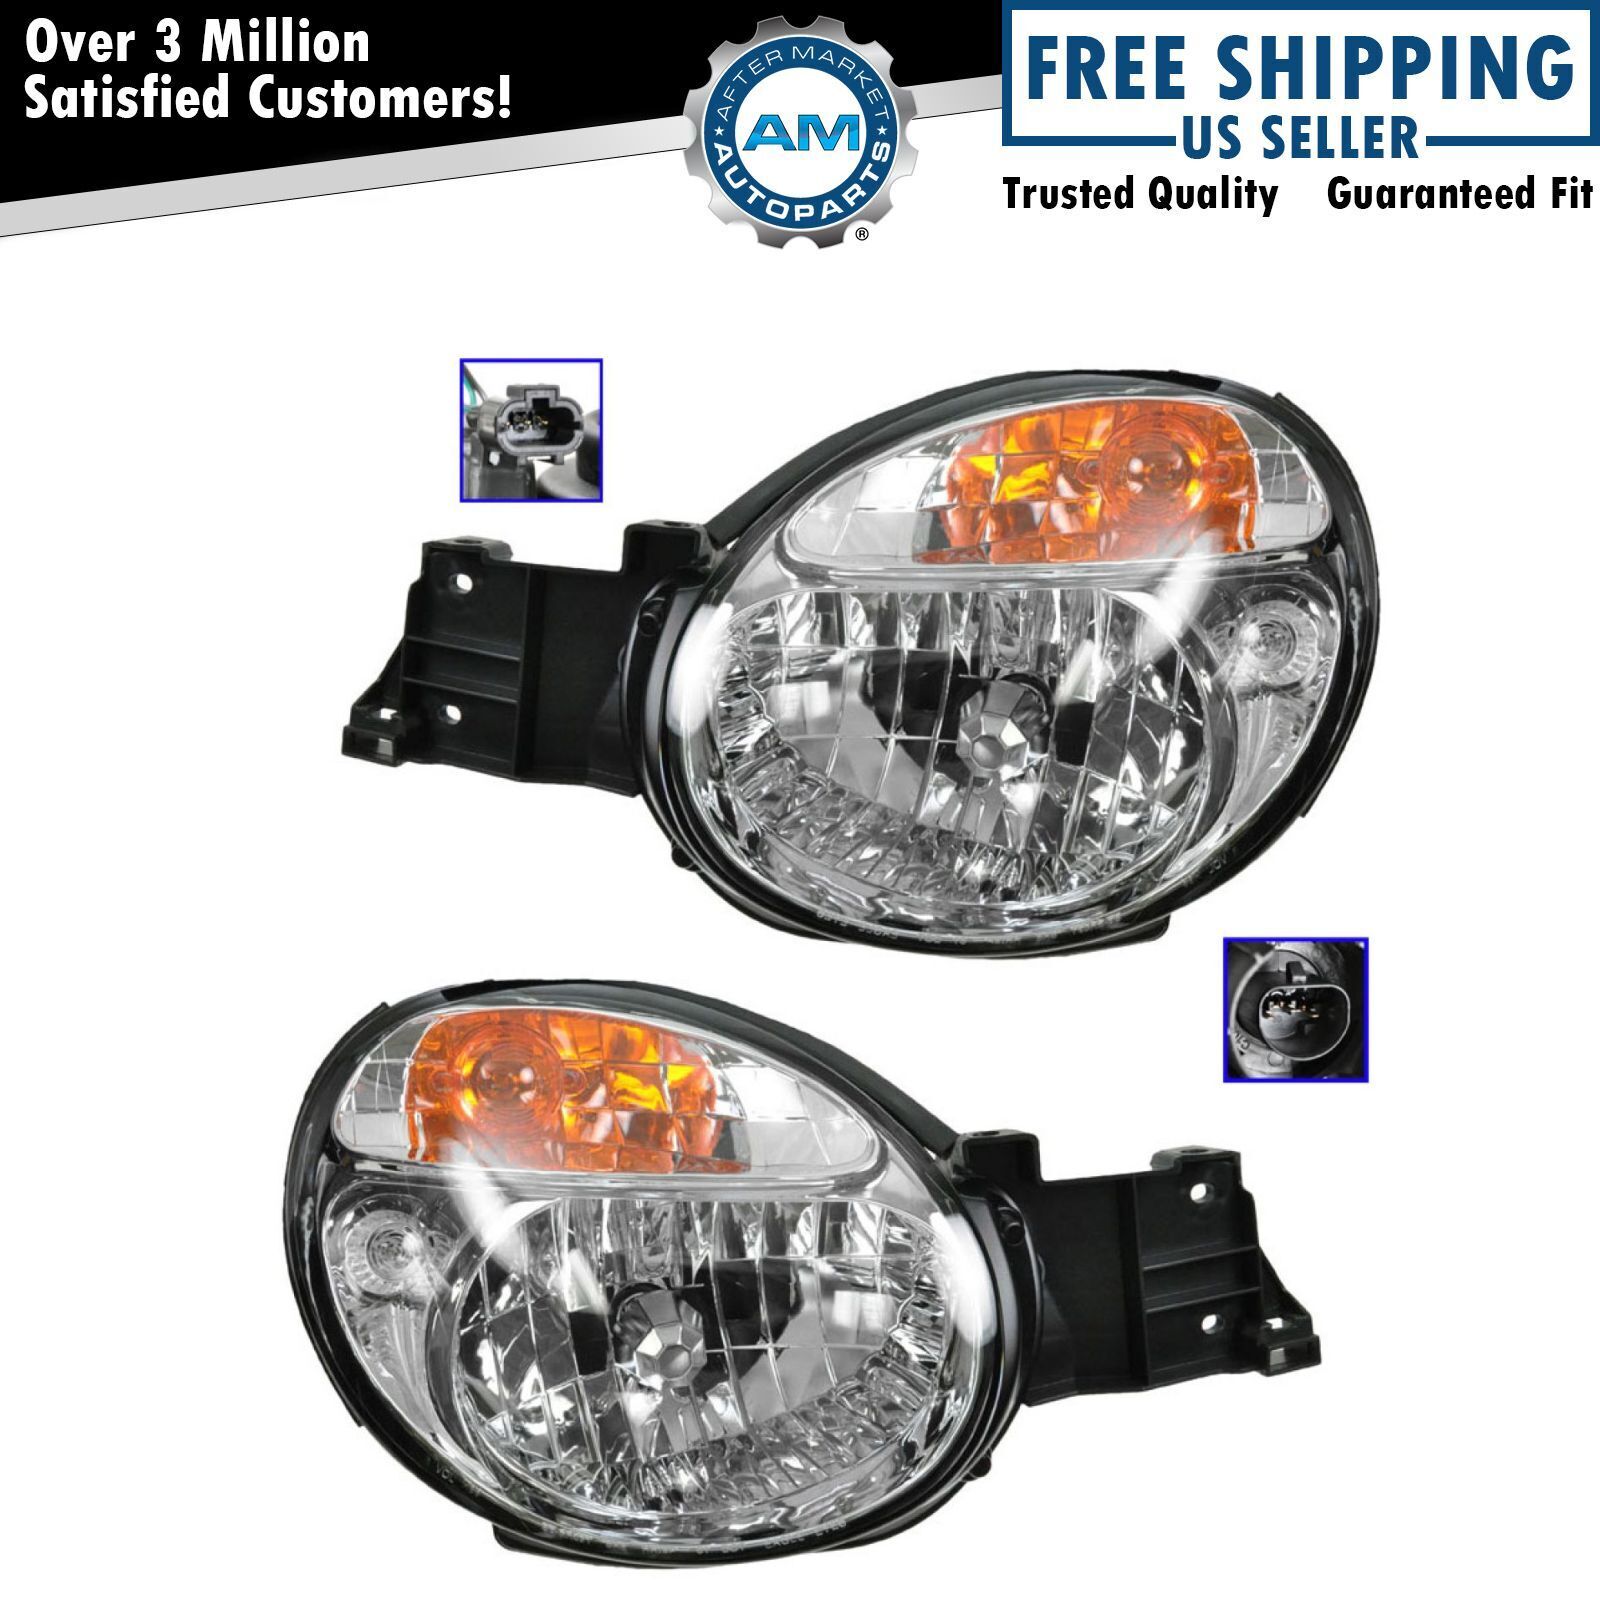 Headlights Headlamps Left & Right Pair Set NEW for 02-03 Impreza Outback WRX